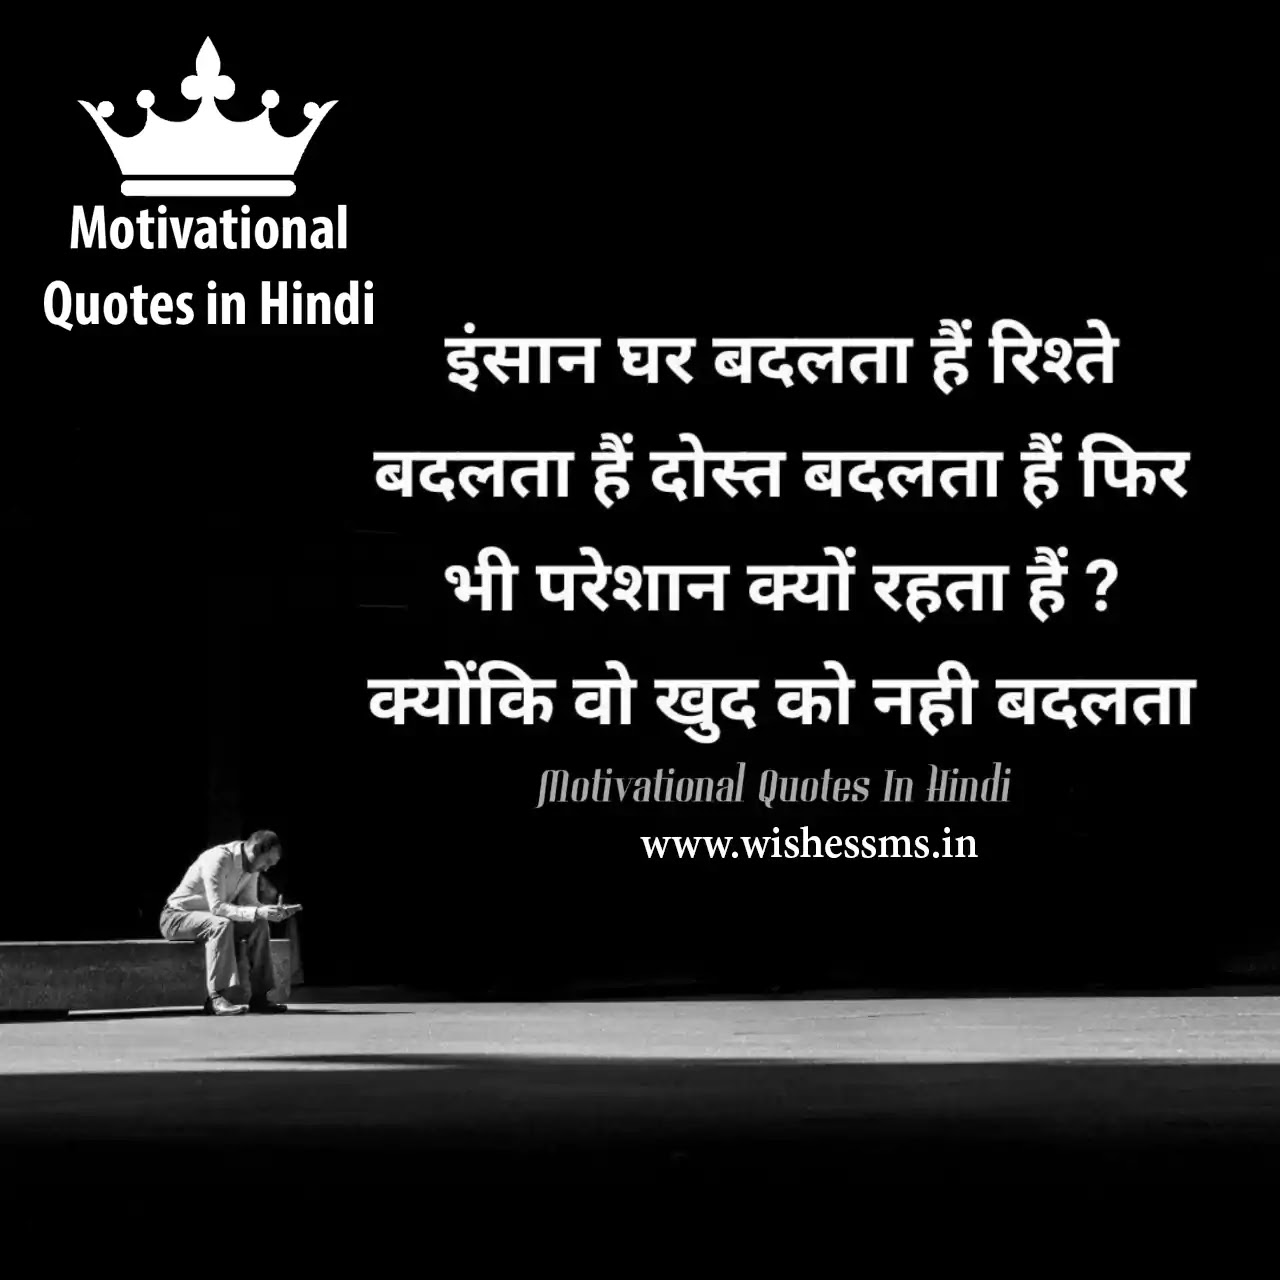 BEST LIFE CHANGING MOTIVATIONAL QUOTES, THOUGHTS, STATUS IN HINDI ...